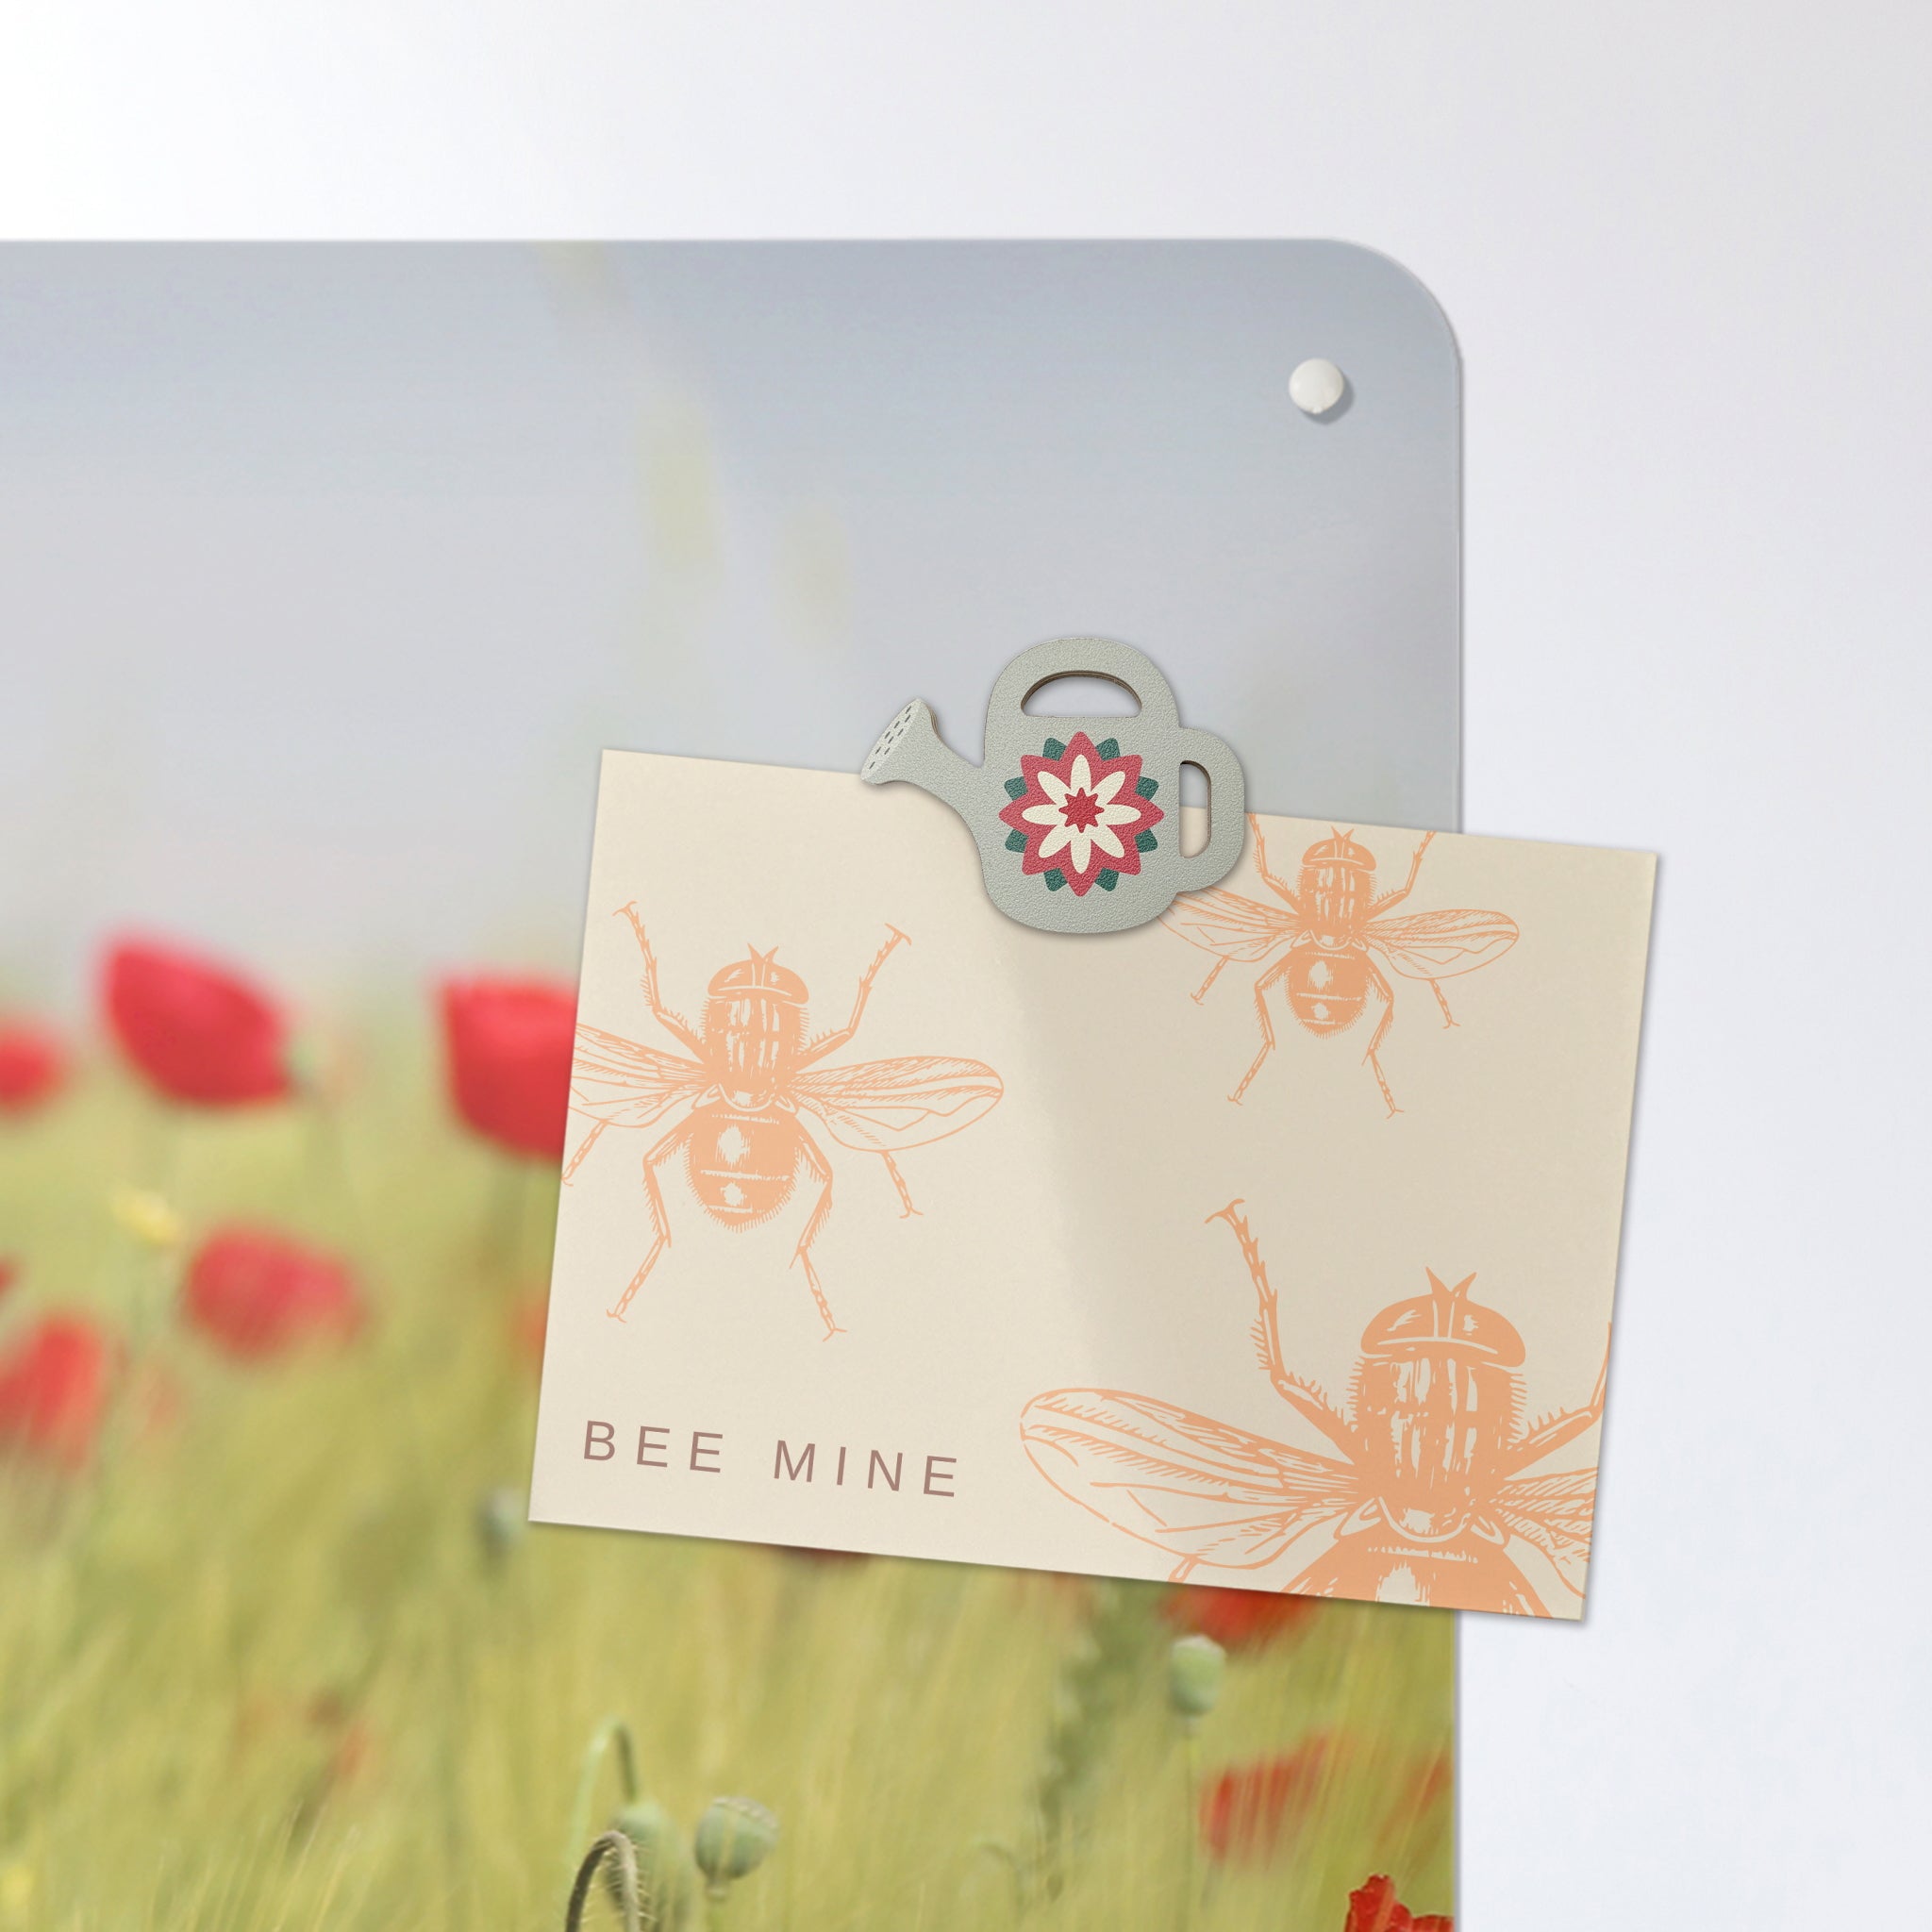 A postcard attached with a watering can design plywood fridge magnet on a poppy field photographic magnetic board or metal wall art panel